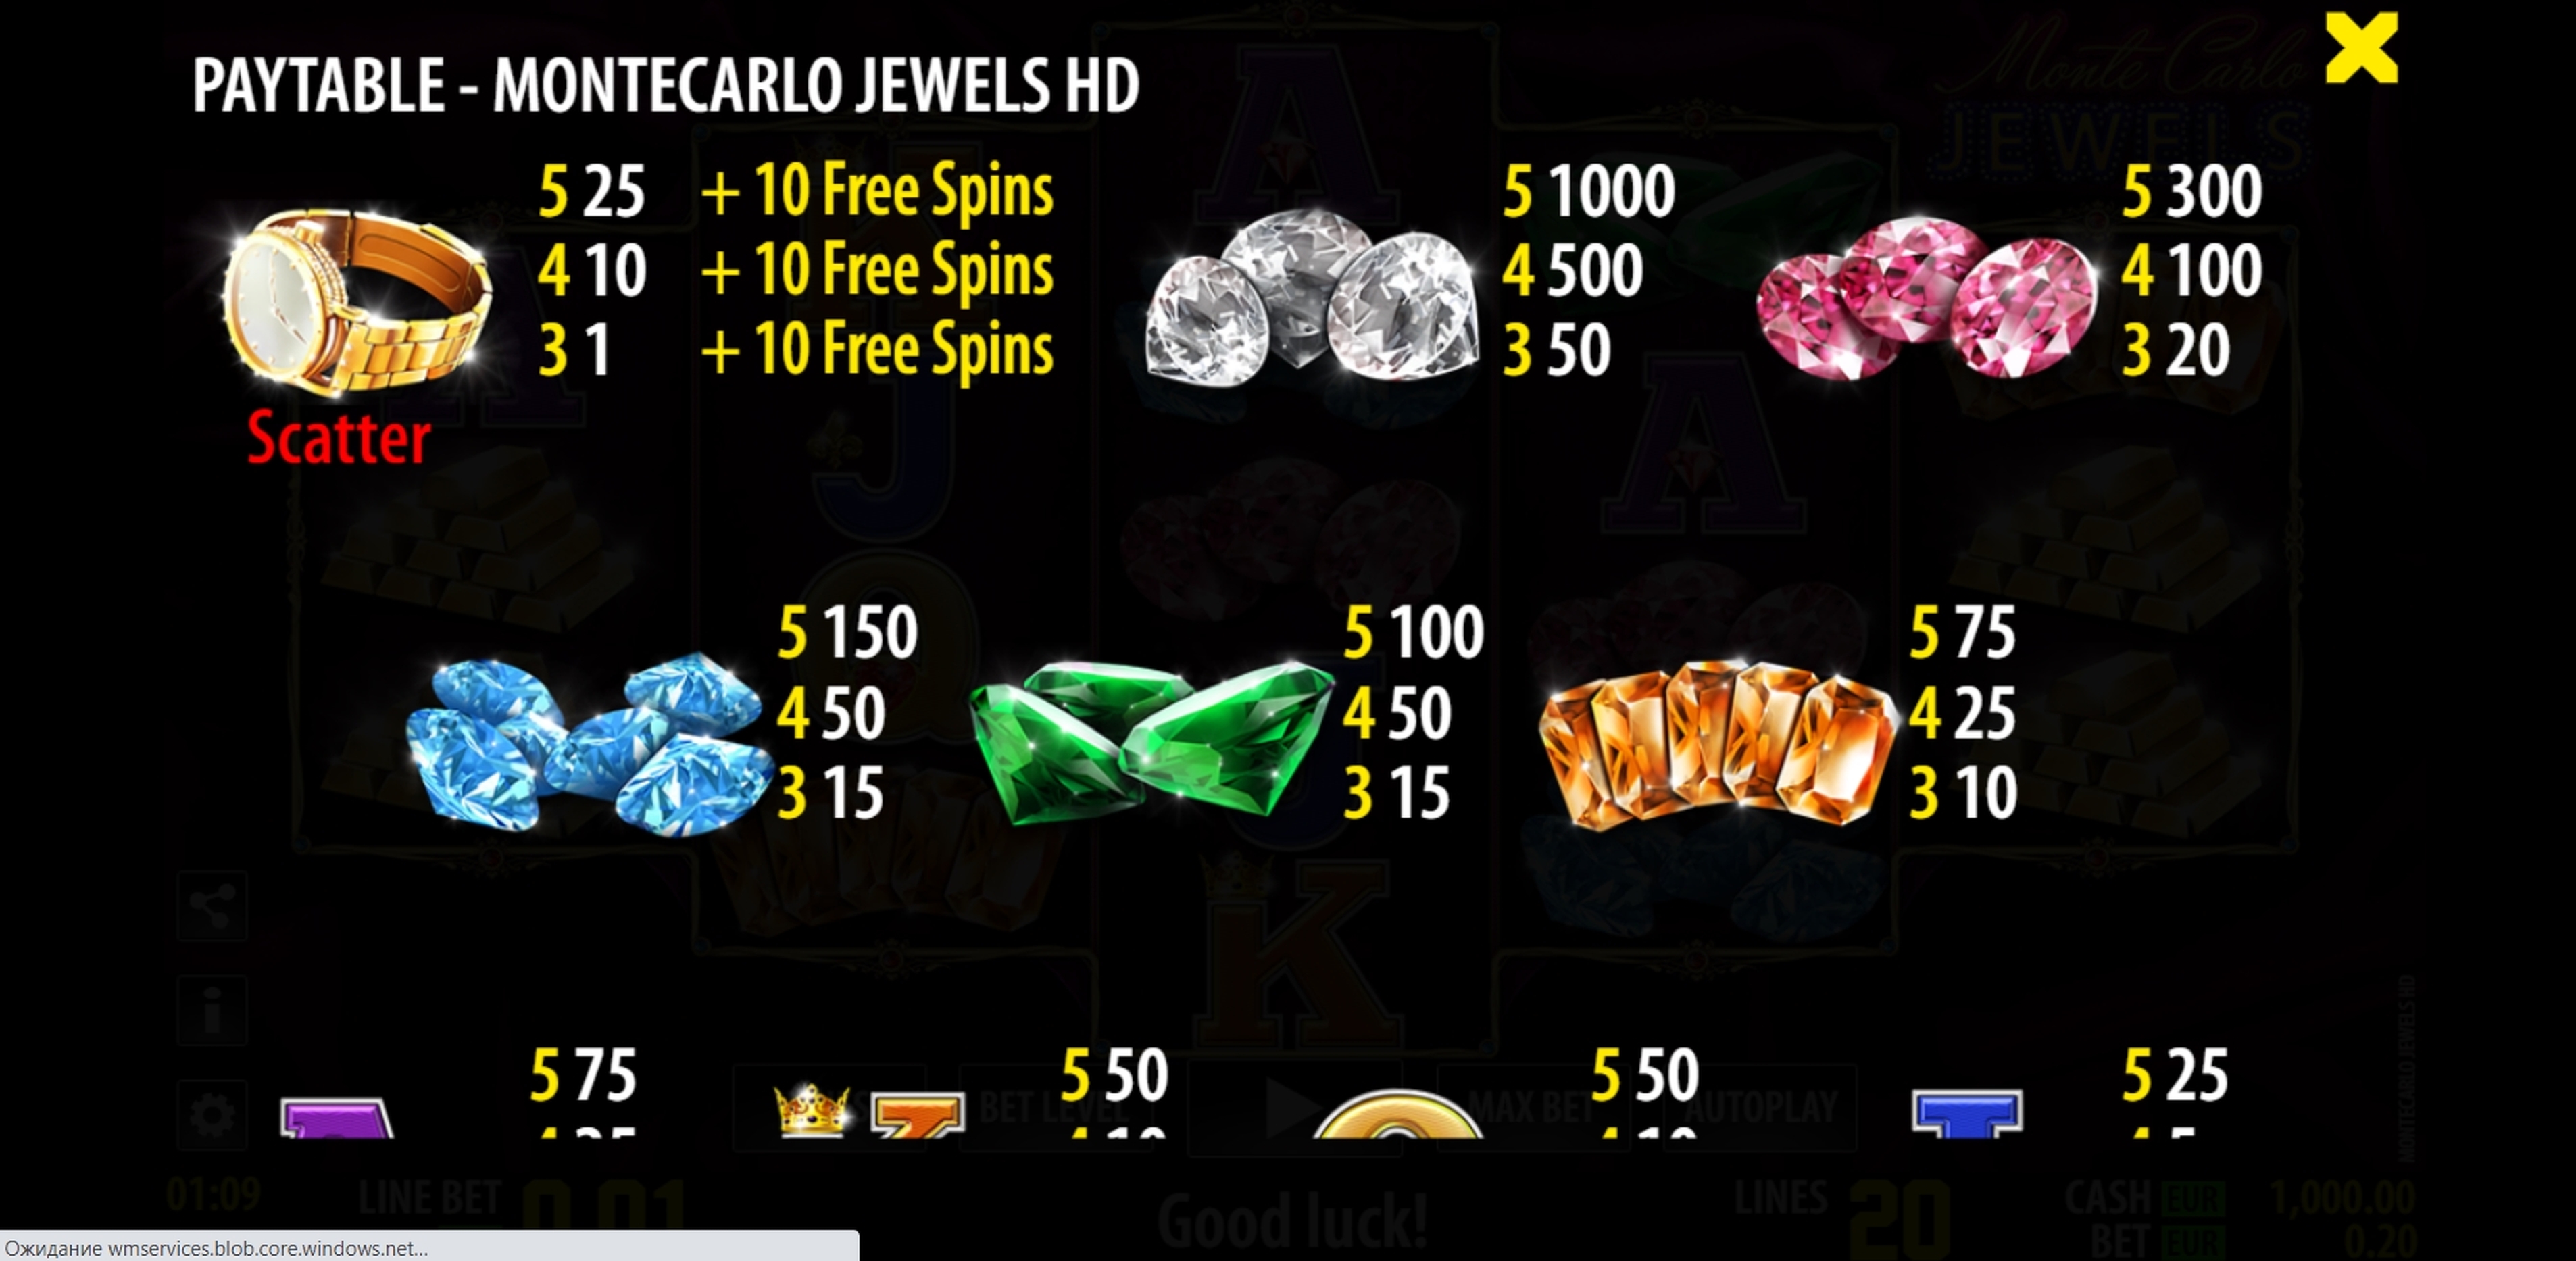 Info of Monte Carlo Jewels HD Slot Game by World Match